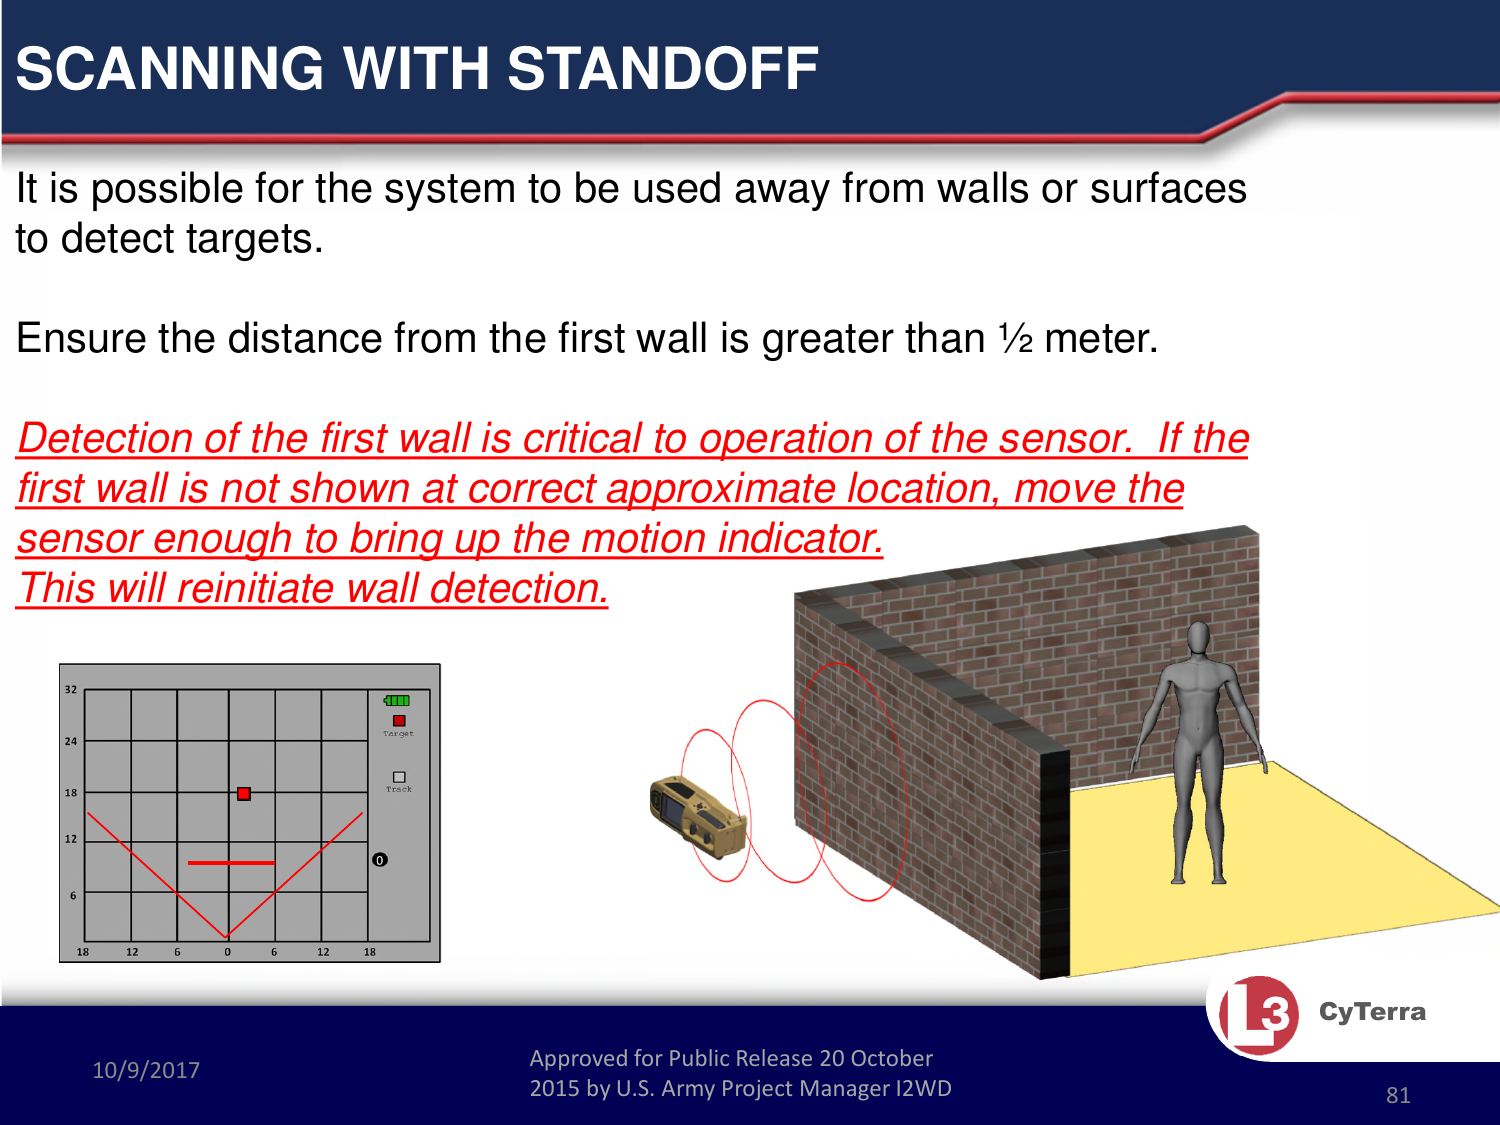 Approved for Public Release 20 October 2015 by U.S. Army Project Manager I2WD10/9/2017 Approved for Public Release 20 October 2015 by U.S. Army Project Manager I2WD 81CyTerraSCANNING WITH STANDOFF It is possible for the system to be used away from walls or surfaces to detect targets. Ensure the distance from the first wall is greater than ½ meter.Detection of the first wall is critical to operation of the sensor.  If the first wall is not shown at correct approximate location, move the sensor enough to bring up the motion indicator.  This will reinitiate wall detection.